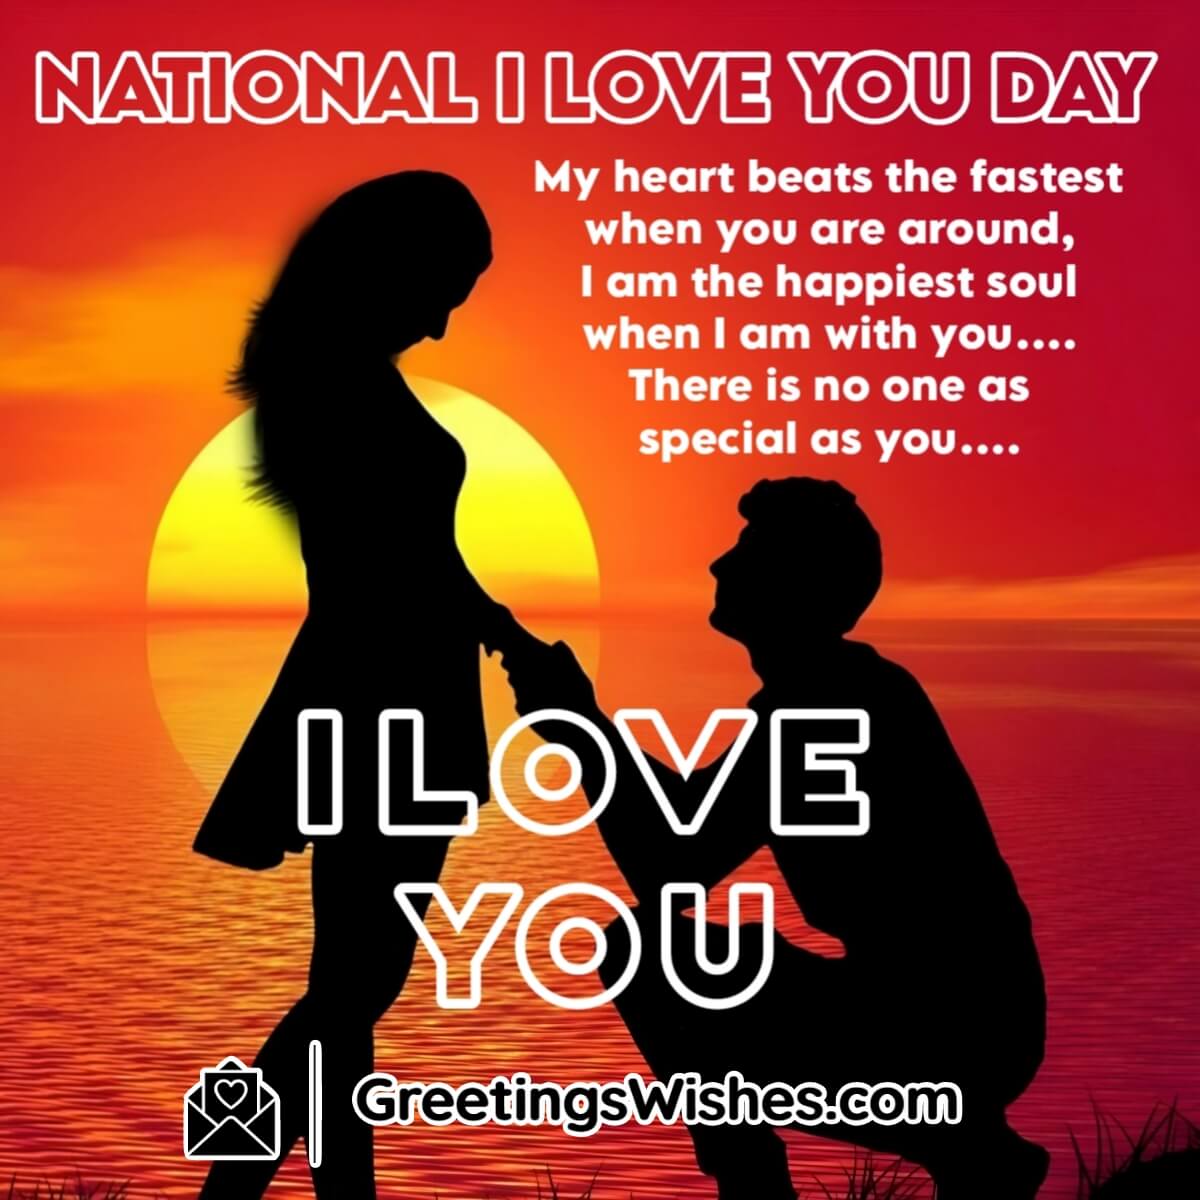 National I Love You Day Messages Wishes – 14 October